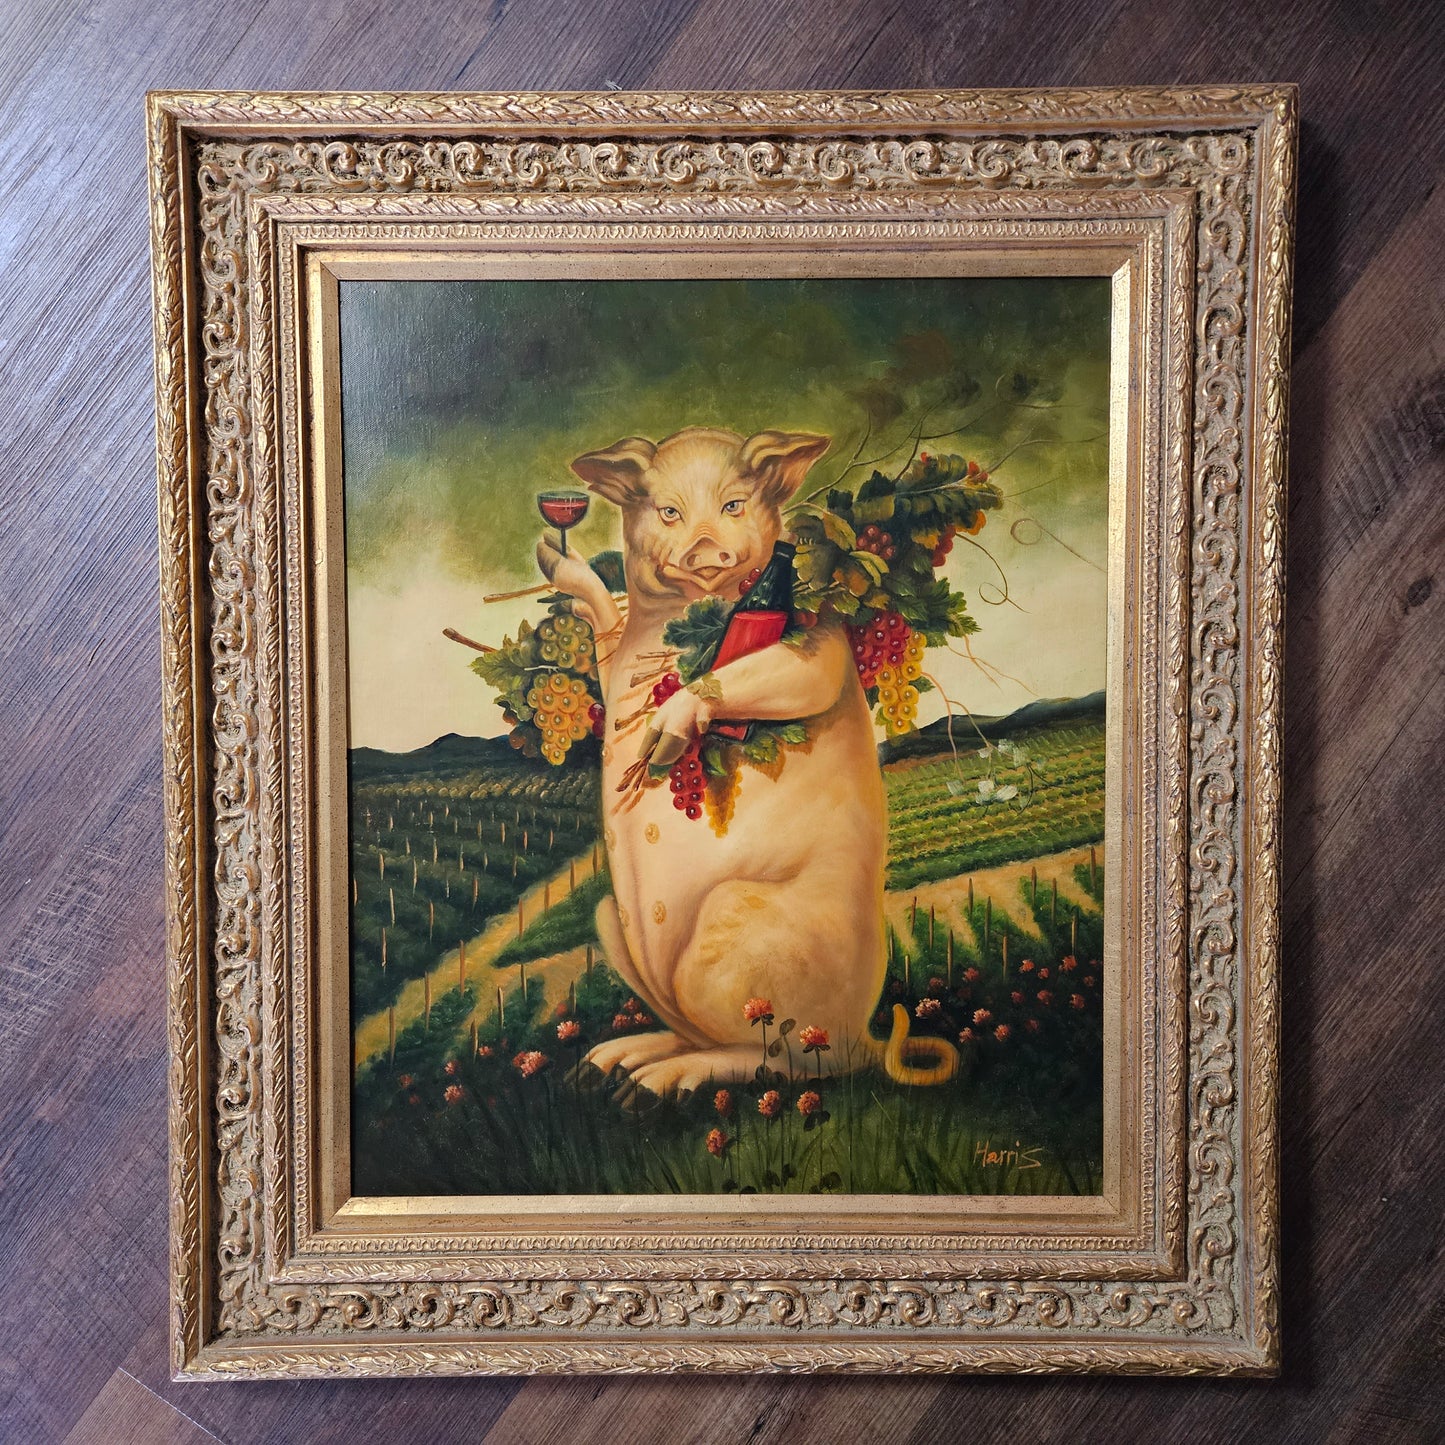 Decorator Painting of a Pig Holding a Wine Glass in a Vineyard - Signed Harris